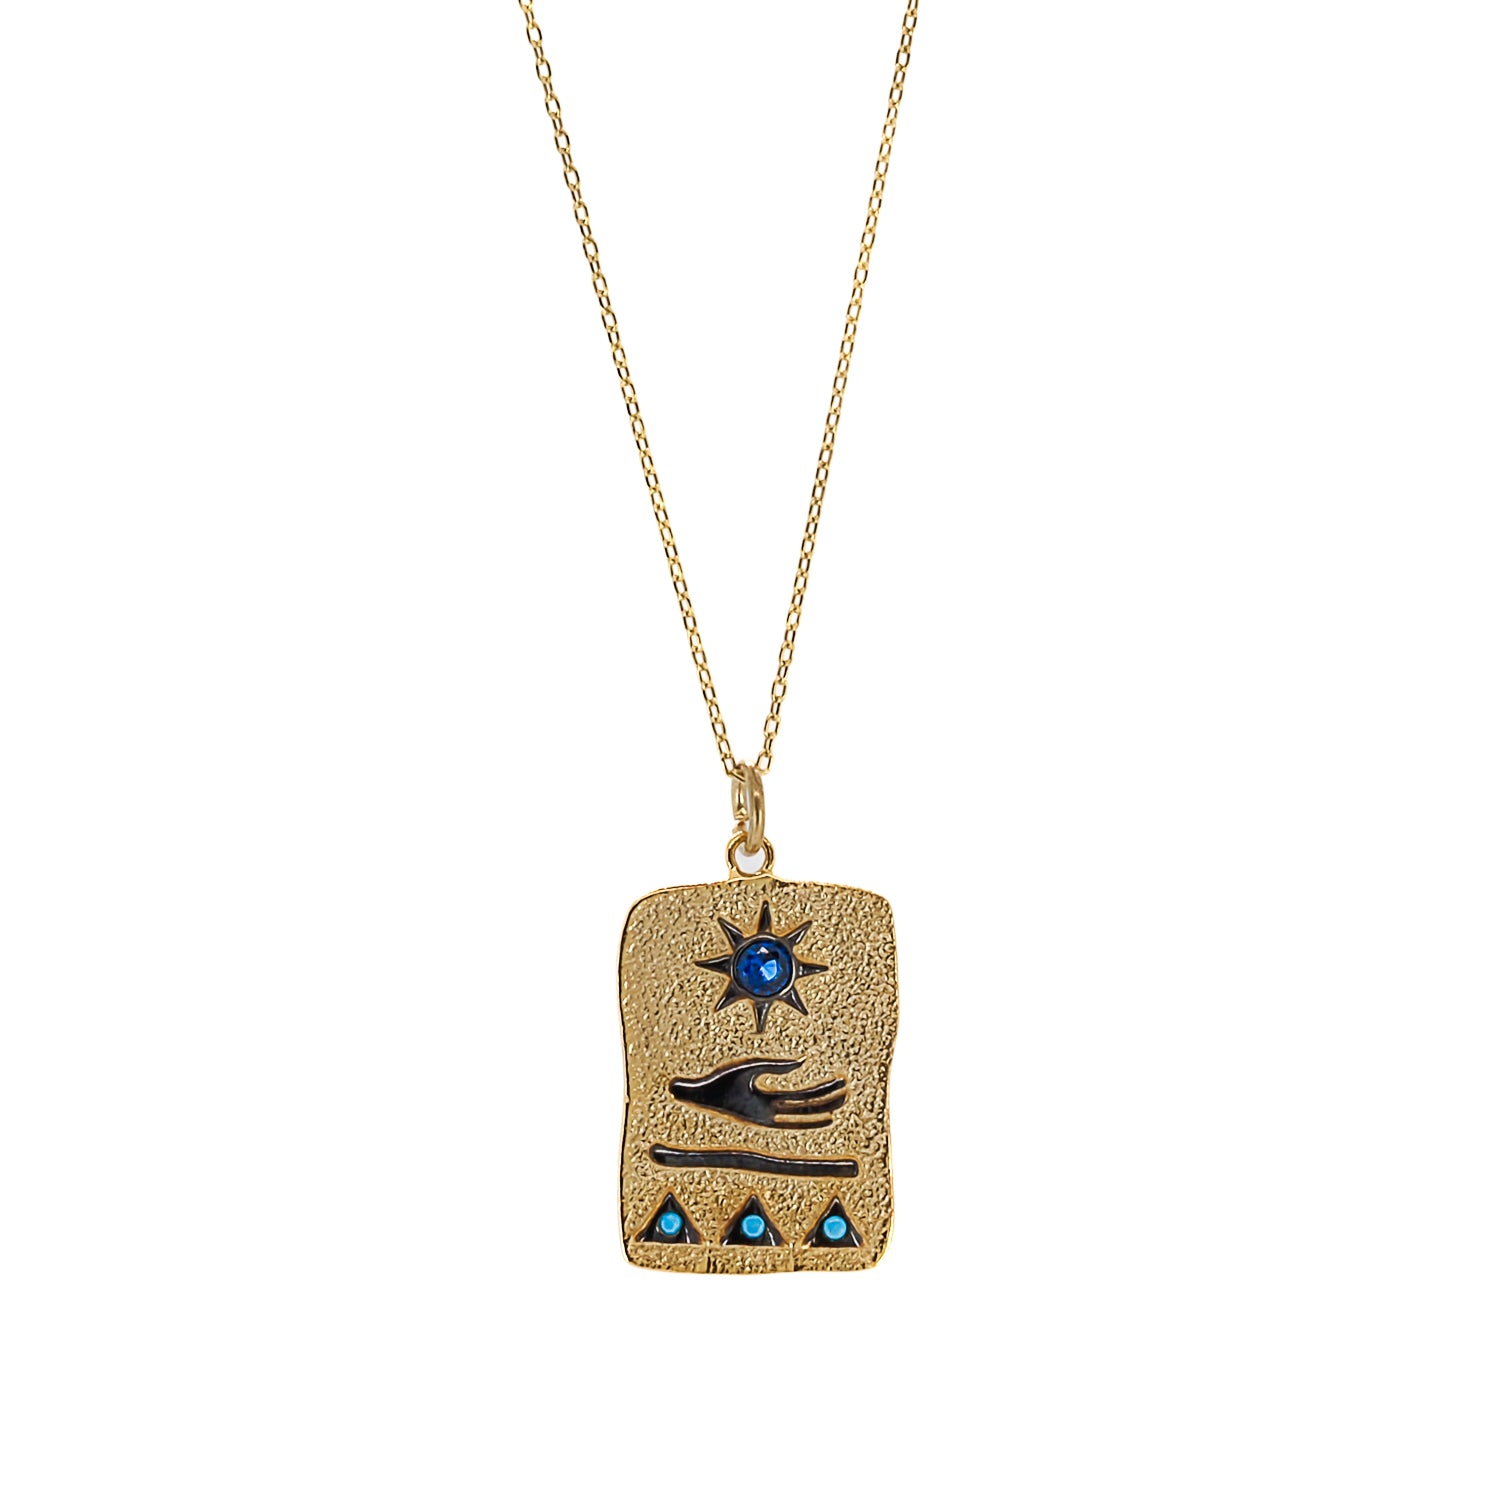 Sun Necklace Gold with Sapphire Gemstone - A Celestial Masterpiece.